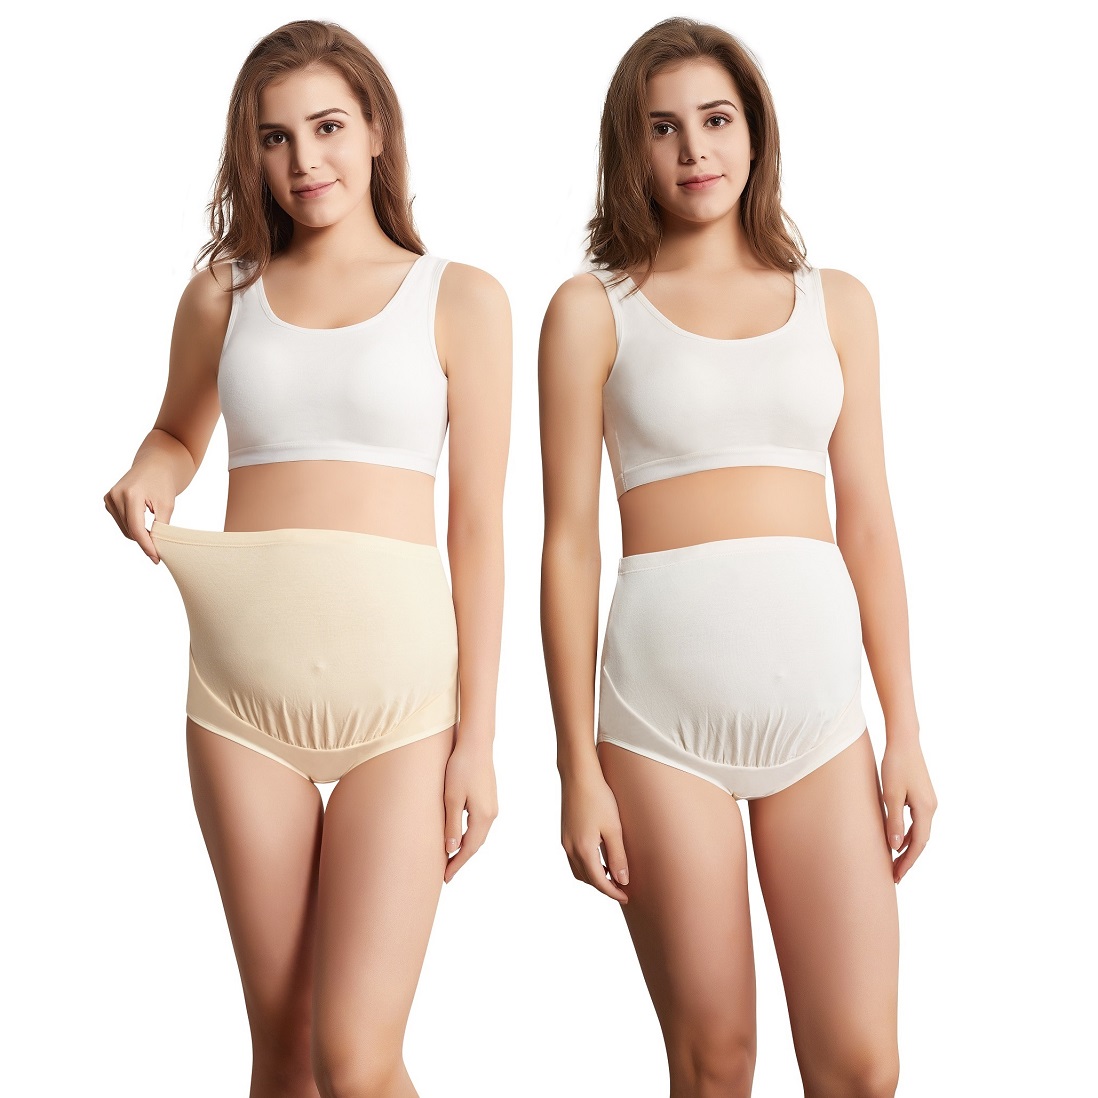 Organic Over Belly Maternity Panties order online